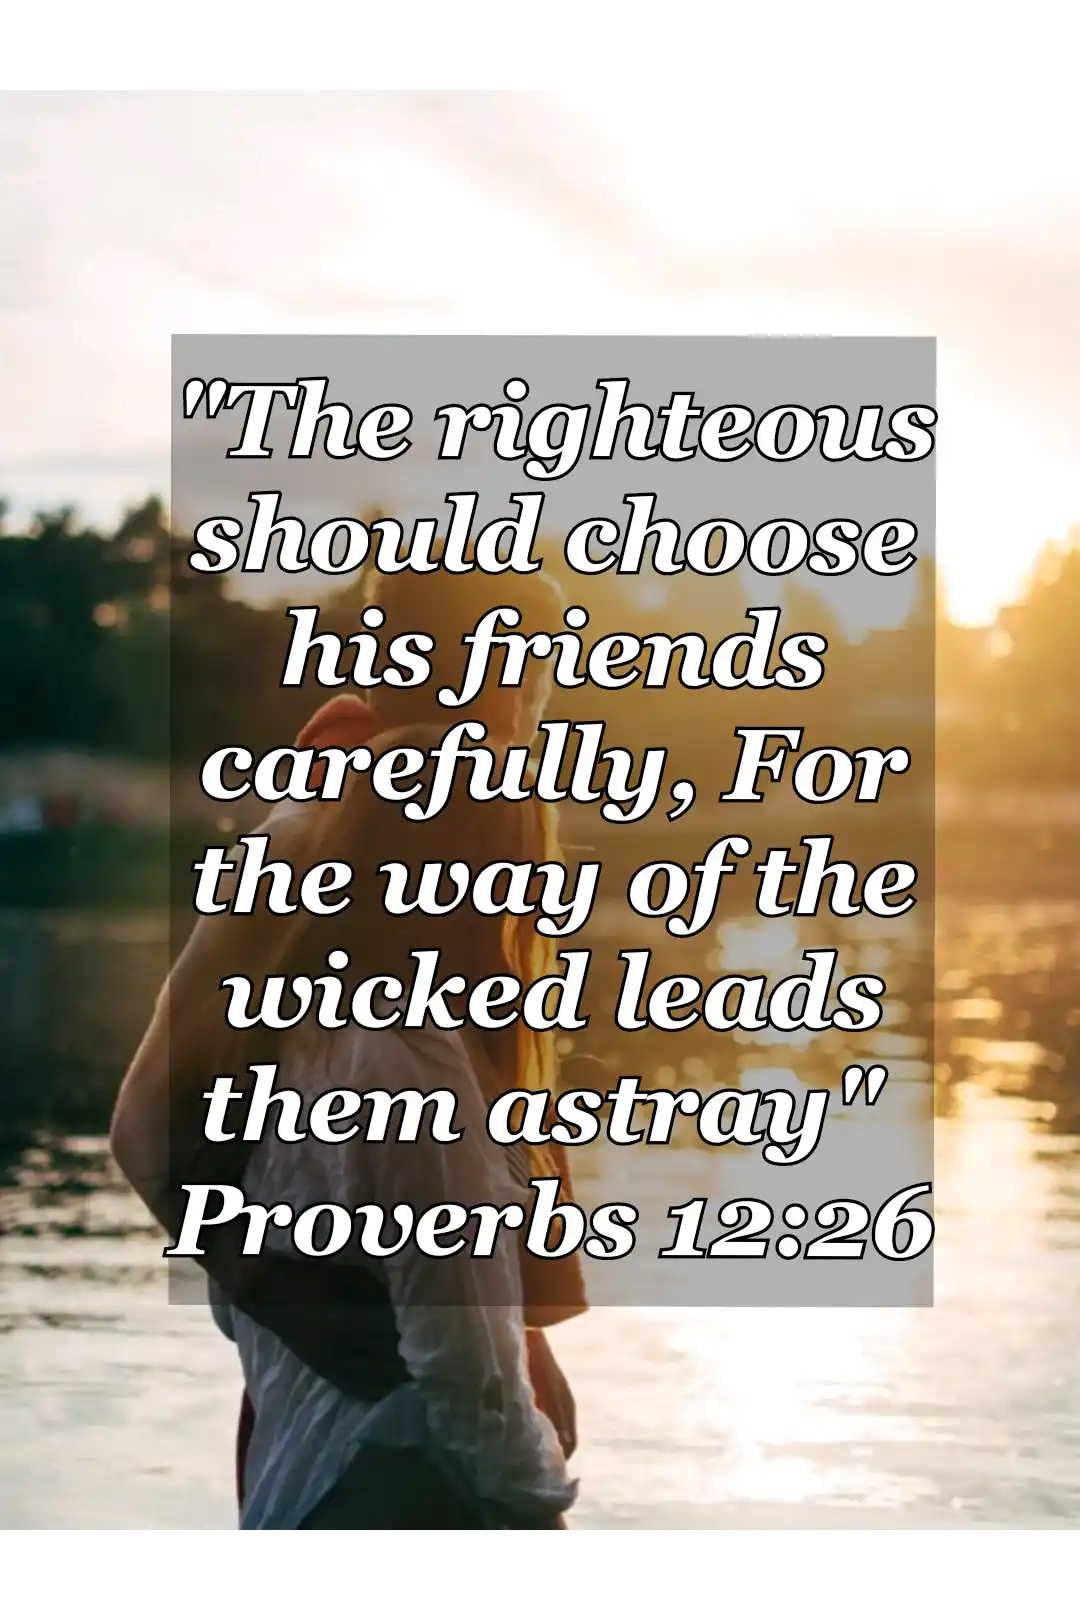 bibile-verses-about-friendship (Proverbs 12:26)